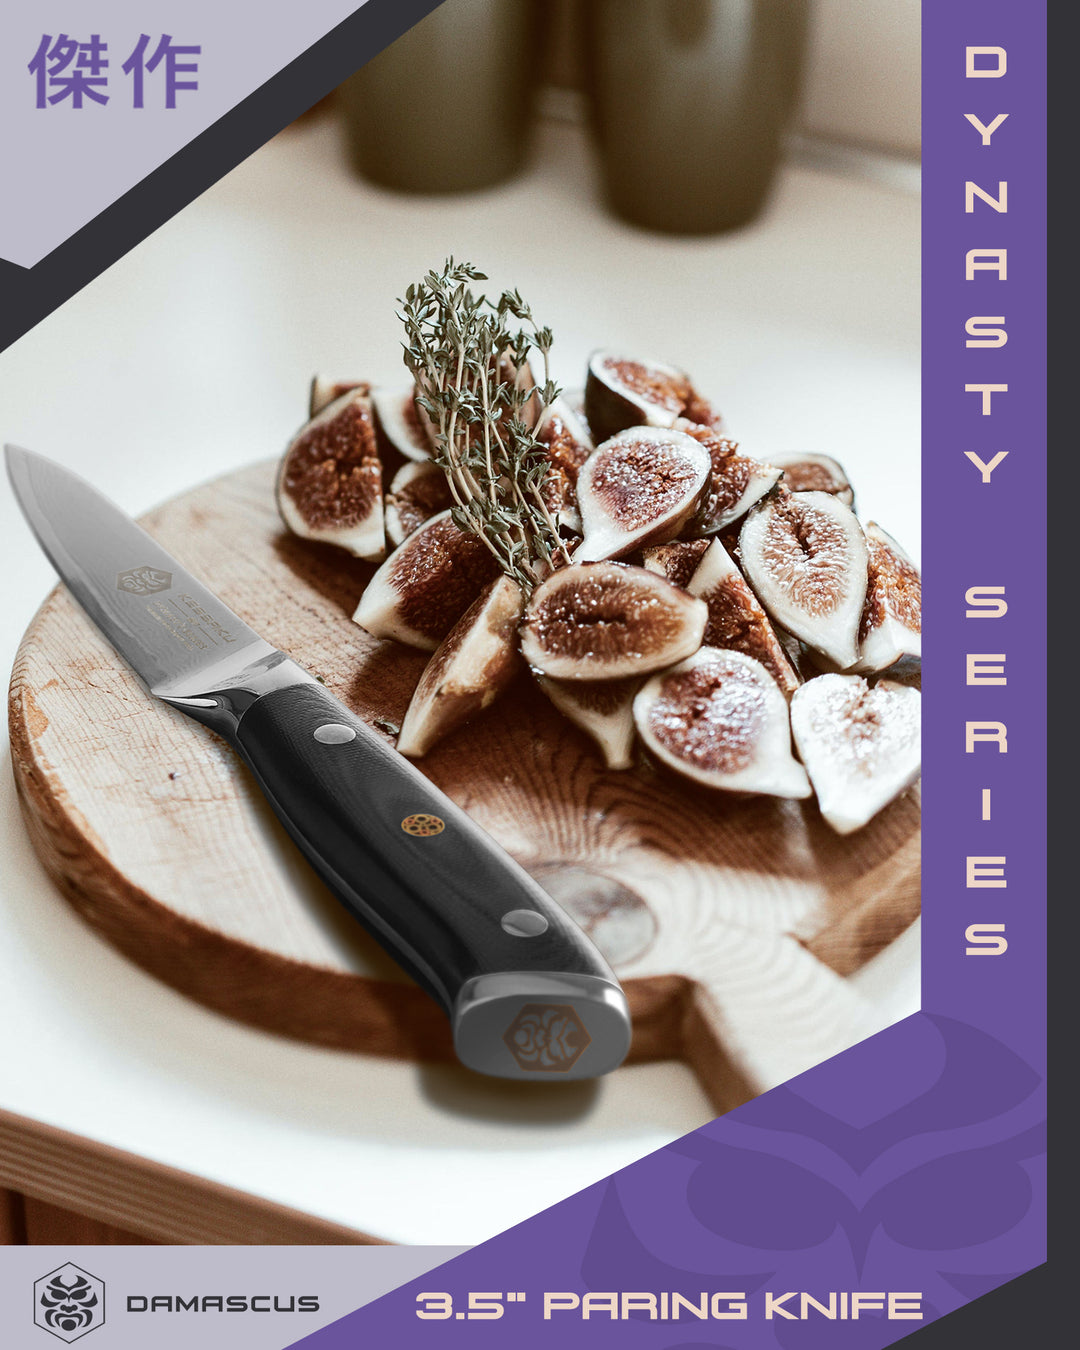 The Damascus Paring Knife next to sliced passionfruit